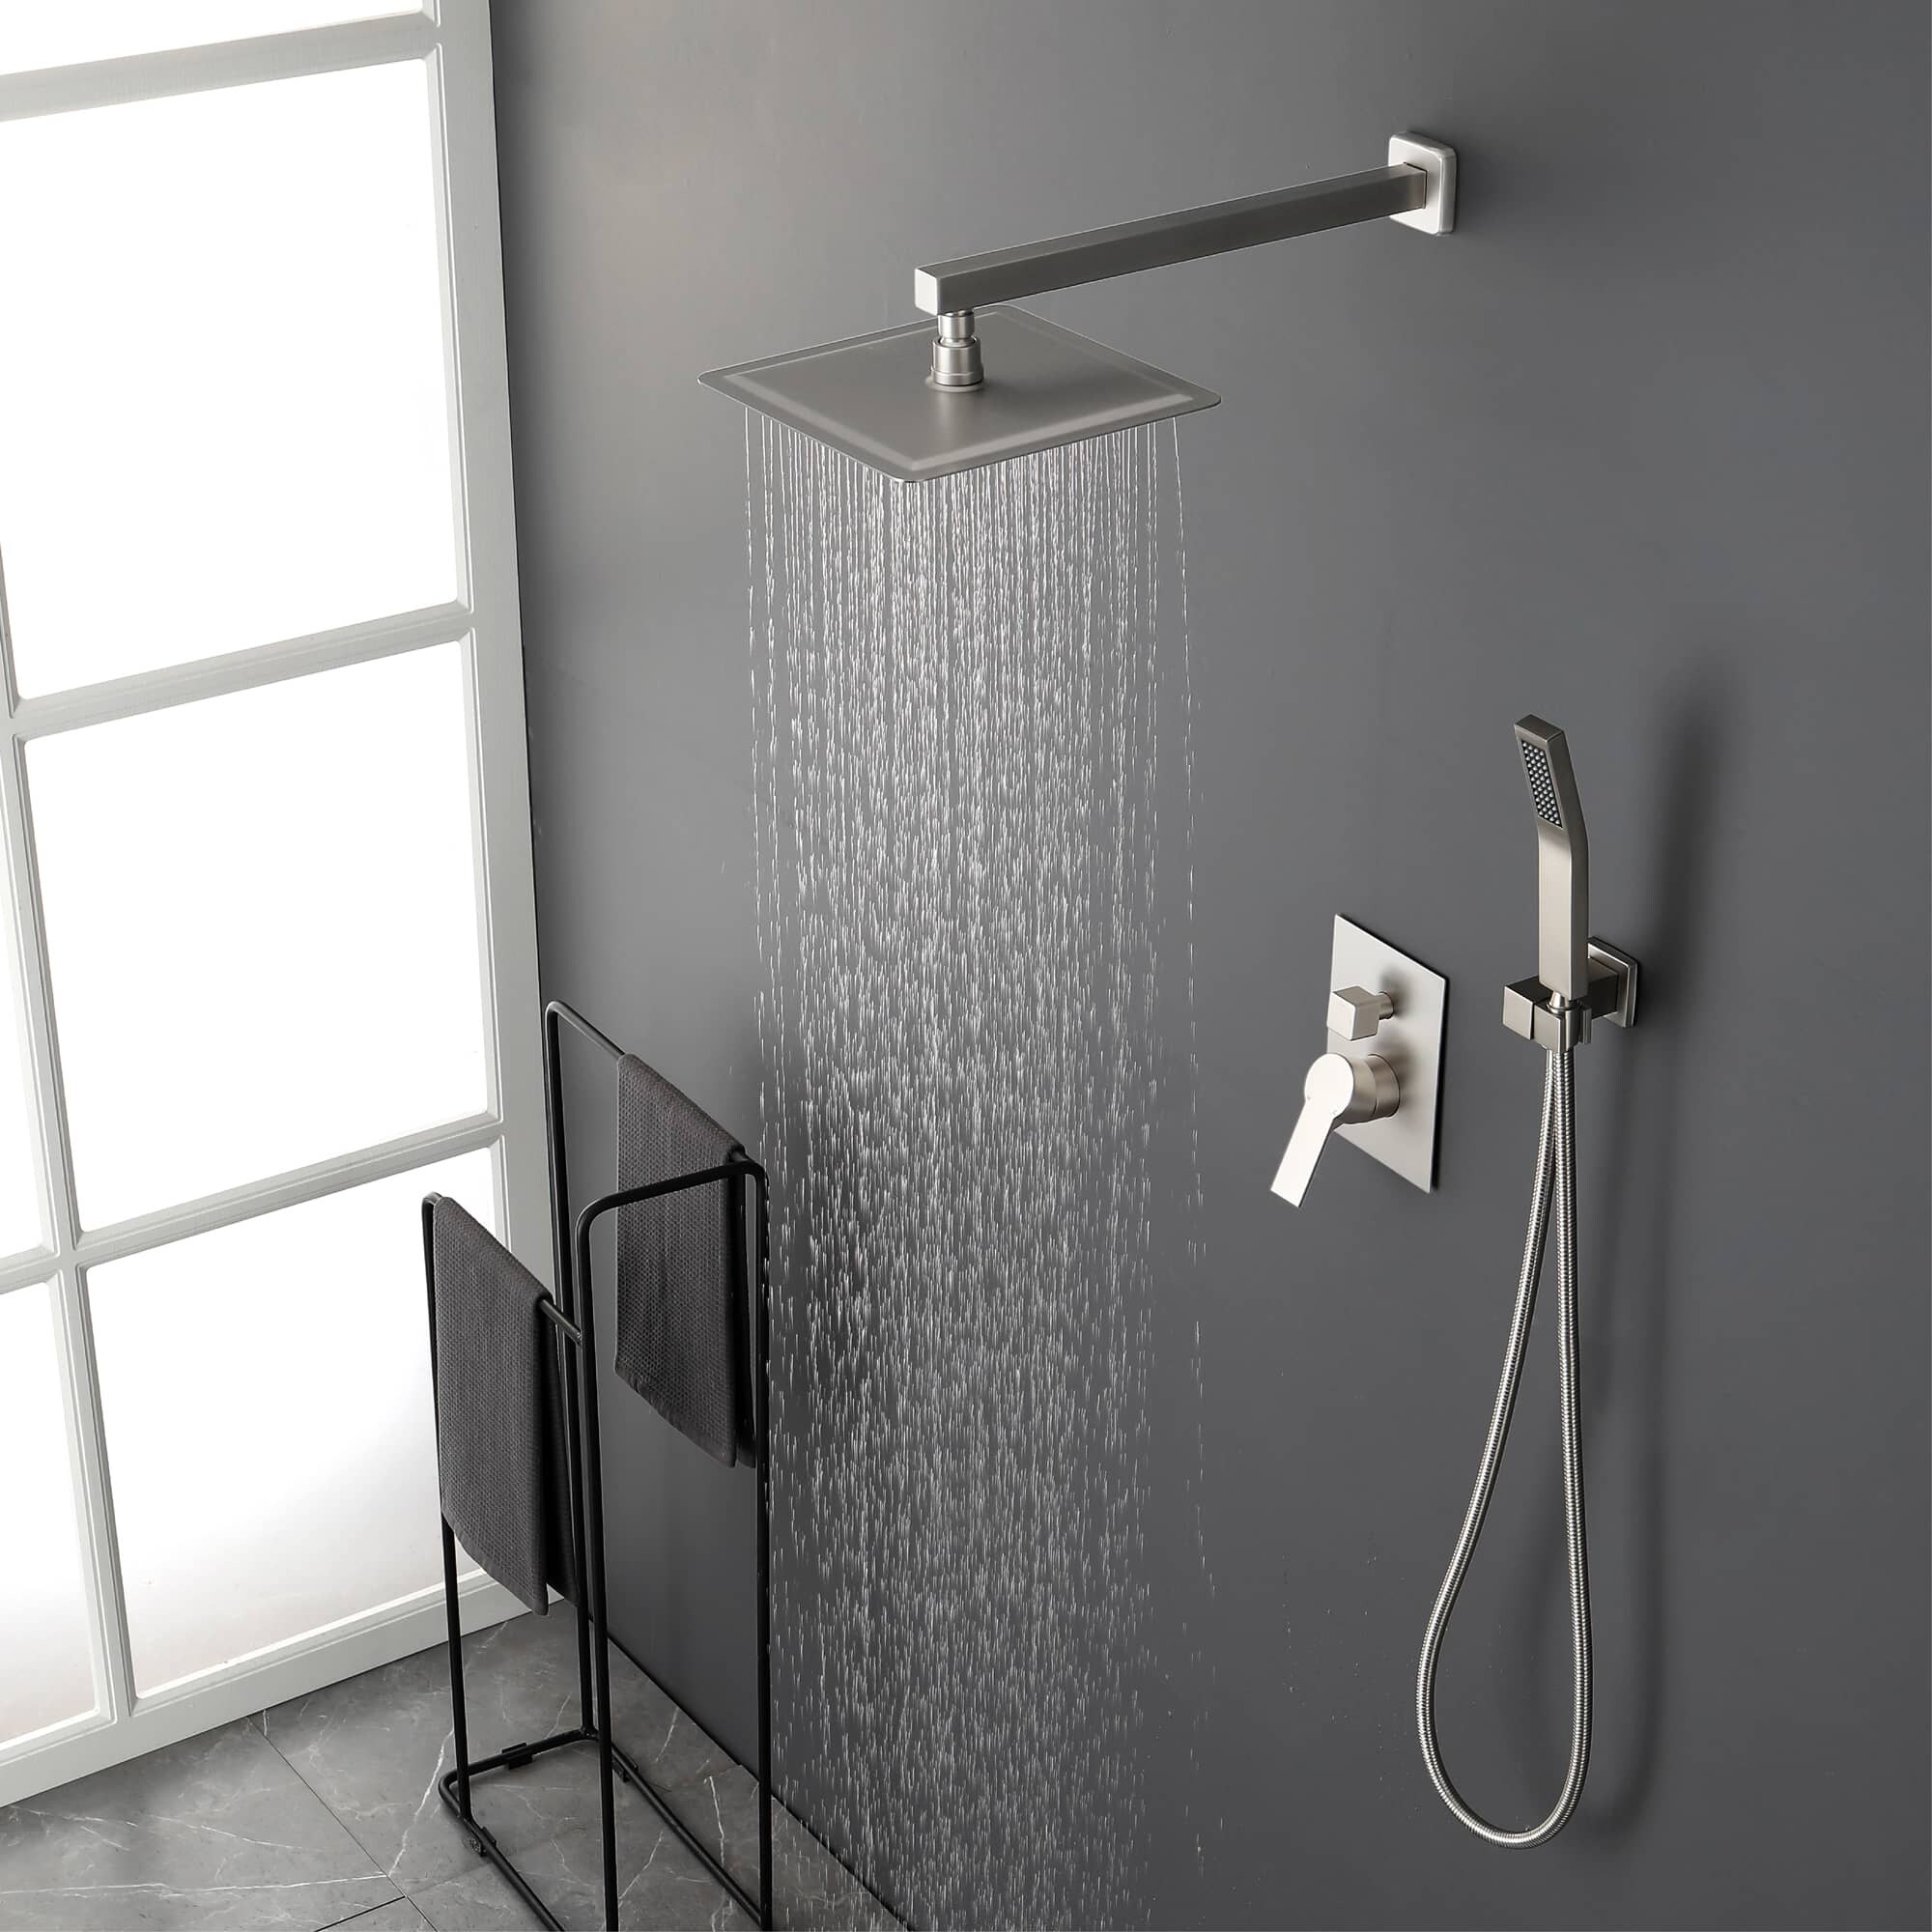 https://ak1.ostkcdn.com/images/products/is/images/direct/e6ed531fc937283ece5725dbfb8b3841d56dcab8/Wall-Mounted-Shower-Faucet-With-Hand-Shower-Modern-Shower-System-Set-10-Inch-Rainfall-Shower-Head-With-Pressure-Balance-Valve.jpg